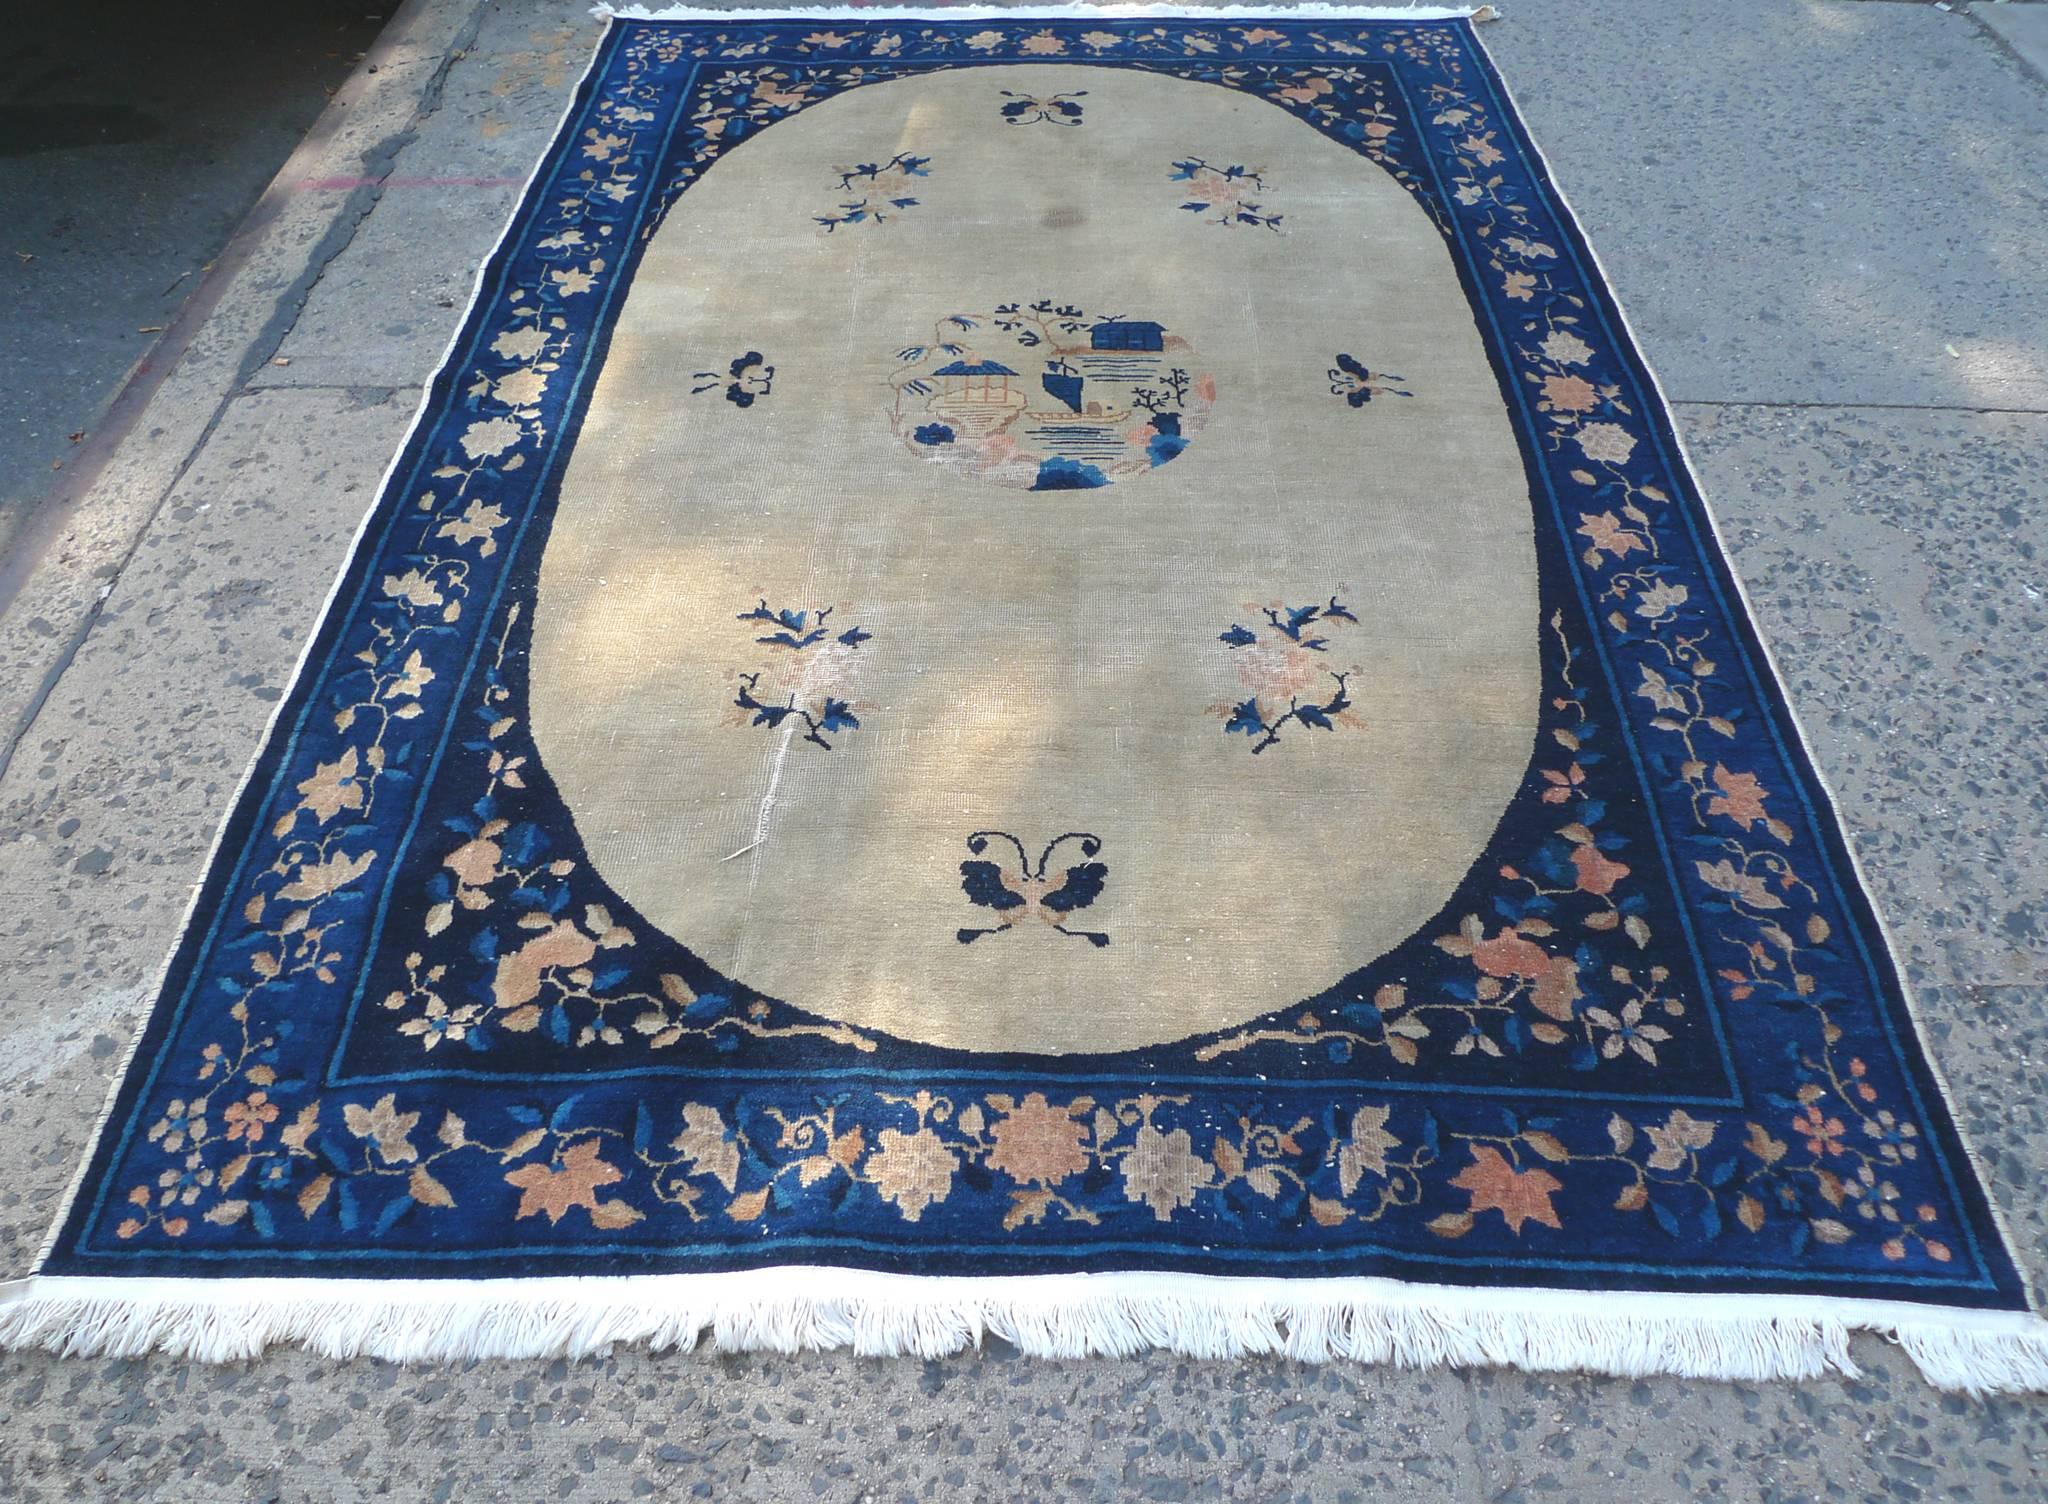 This Chinese Art Deco rug was manufactured by Walter Nichols, circa 1930s-1940s. Its designs consists of a central white oval within a rich blue rectangle, which is in turn surrounded by a blue border. Floral patterns in pink hues adorn the border